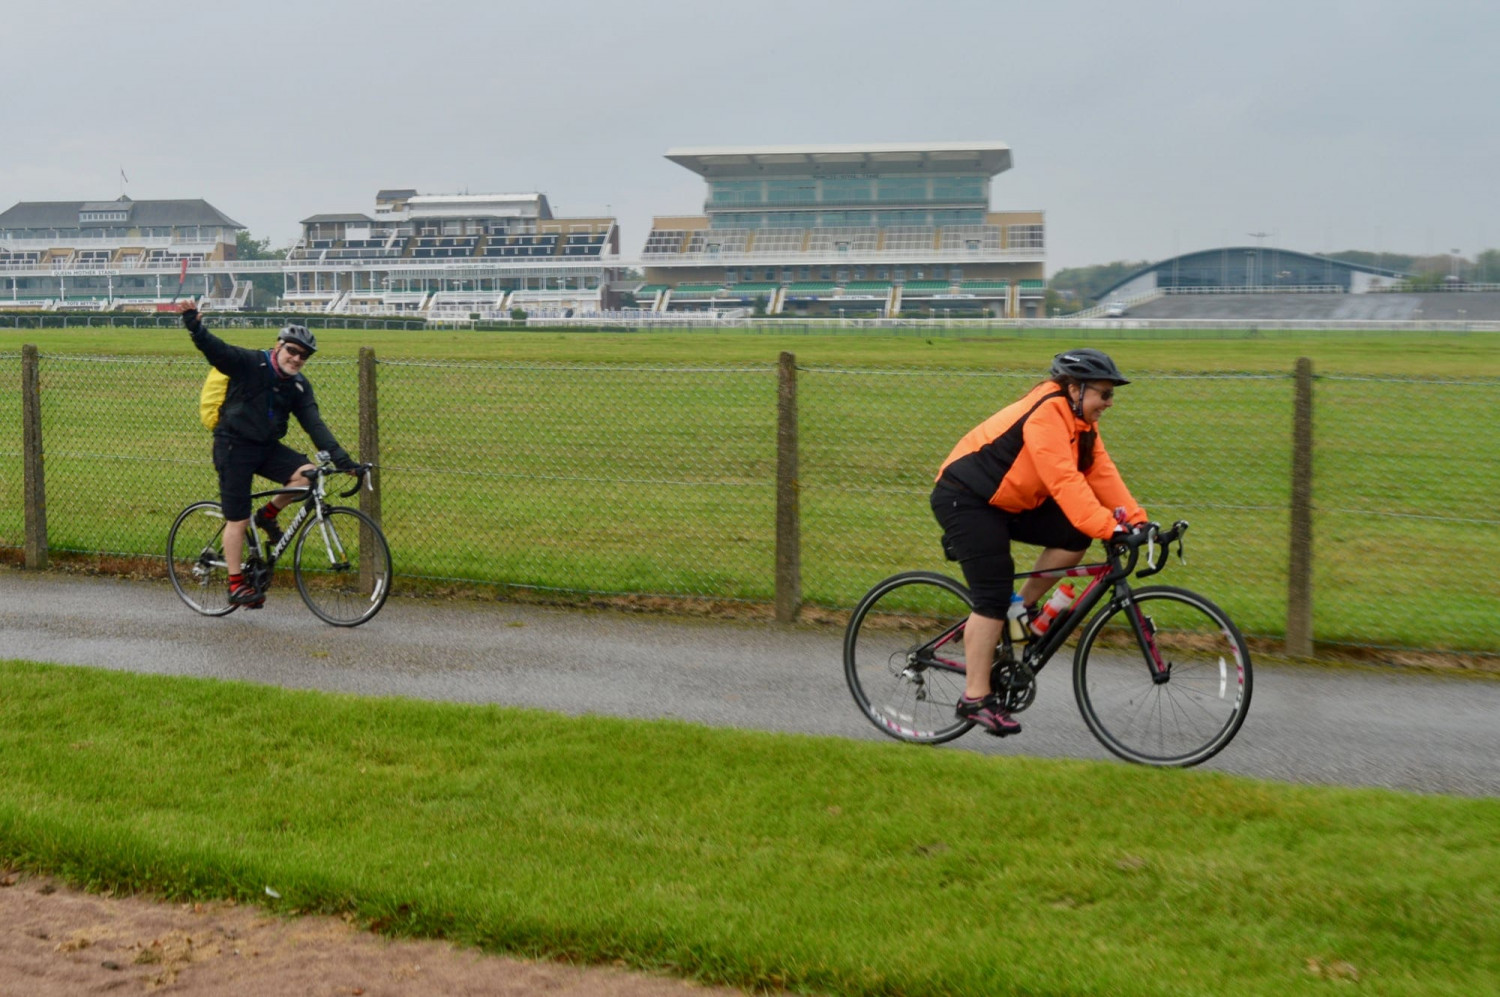 Cycling at Aintree race course